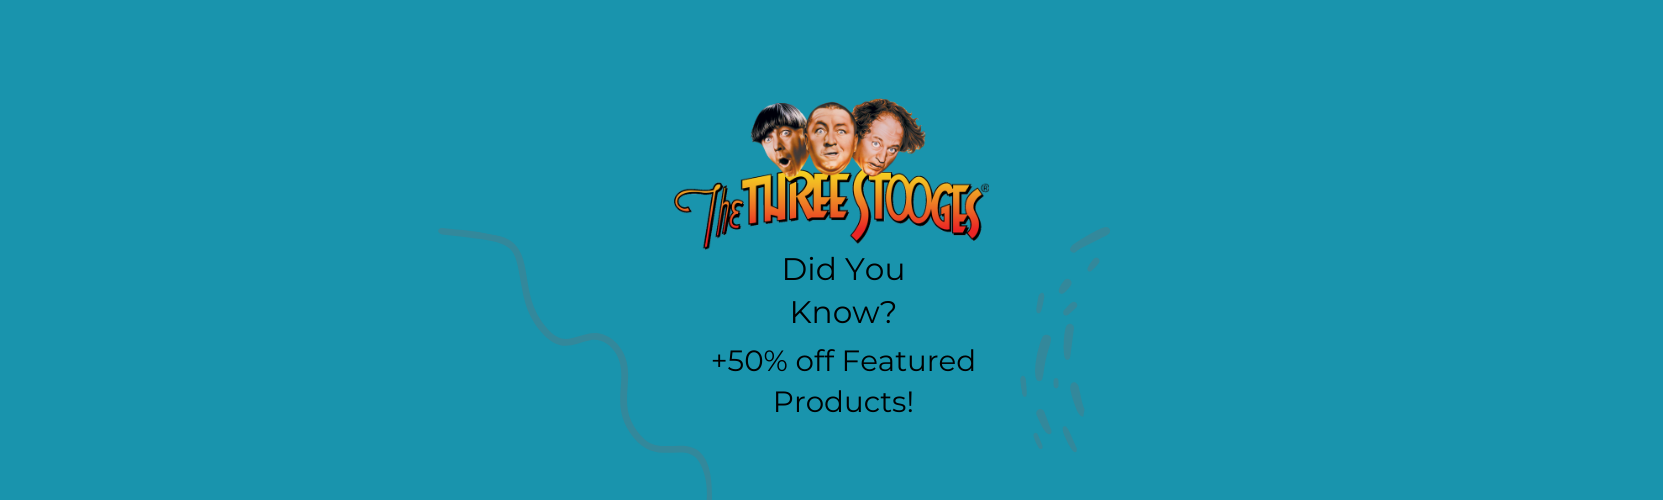 ShopKnuckleheads: Did You Know?